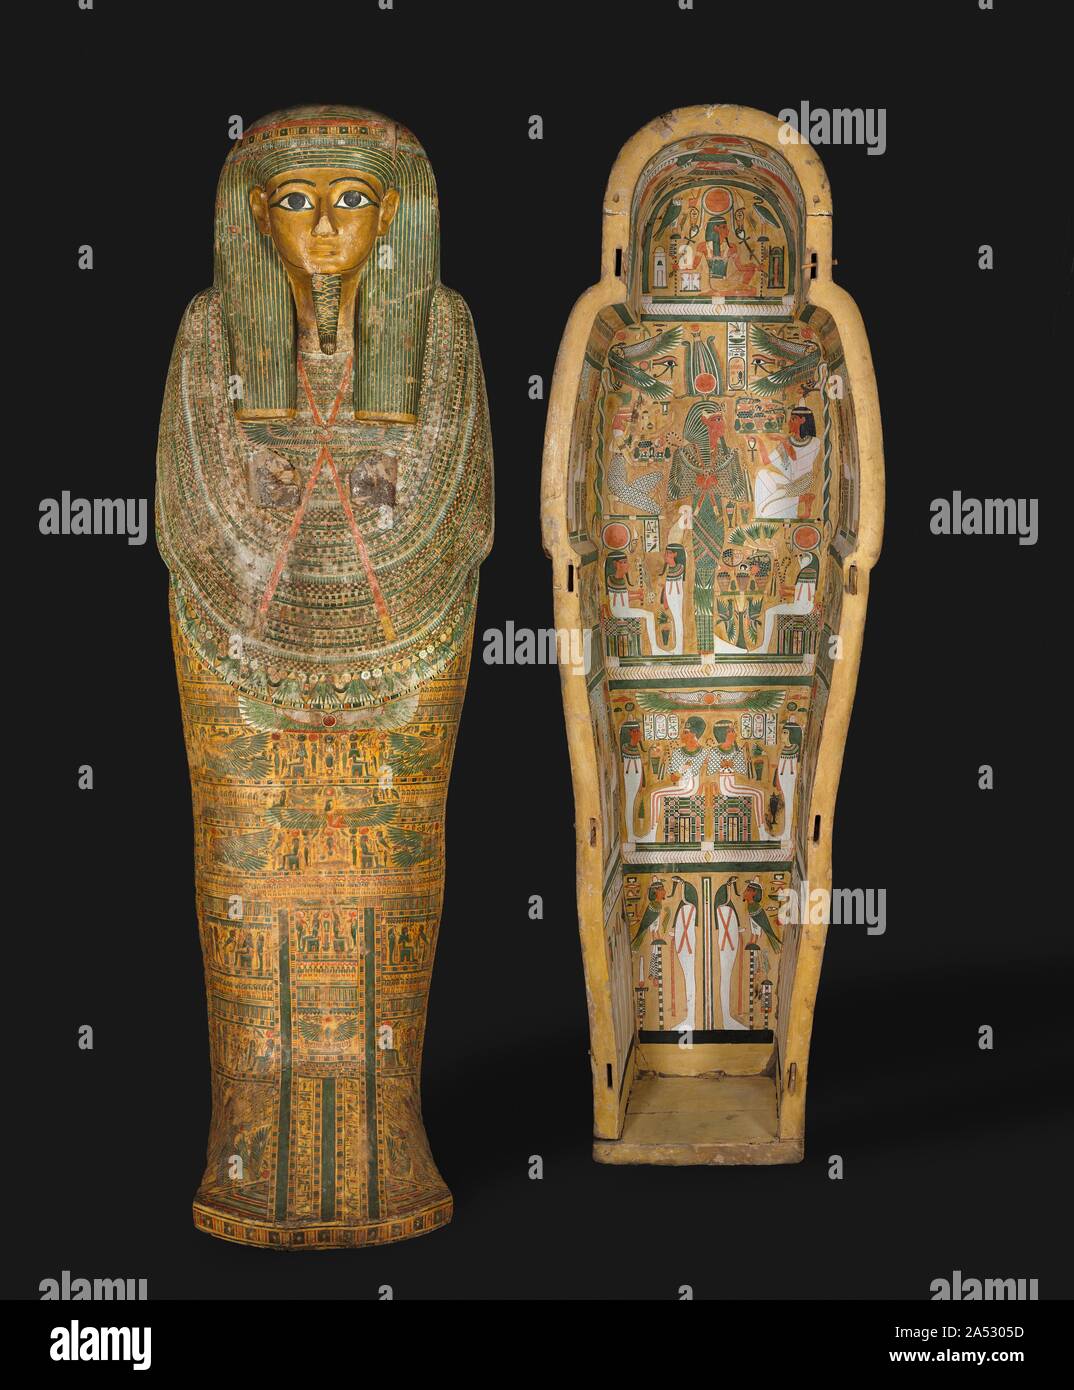 Coffin of Bakenmut, c. 1000-900 BC. The coffin of Bakenmut is one of the finest examples of painted wooden coffins made for the priests of Amen and their families at Thebes during Dynasty 21 and early Dynasty 22. The pharaohs of this time were no longer buried in the Valley of the Kings, but instead built tombs in the Delta, far to the north, where they resided. Security was lax in the Theban necropolis. The coffins and funerary goods of the wealthy citizens of Thebes were placed in unmarked and undecorated family tombs cut into the cliffs on the west bank of the Nile. All the care and detail Stock Photo